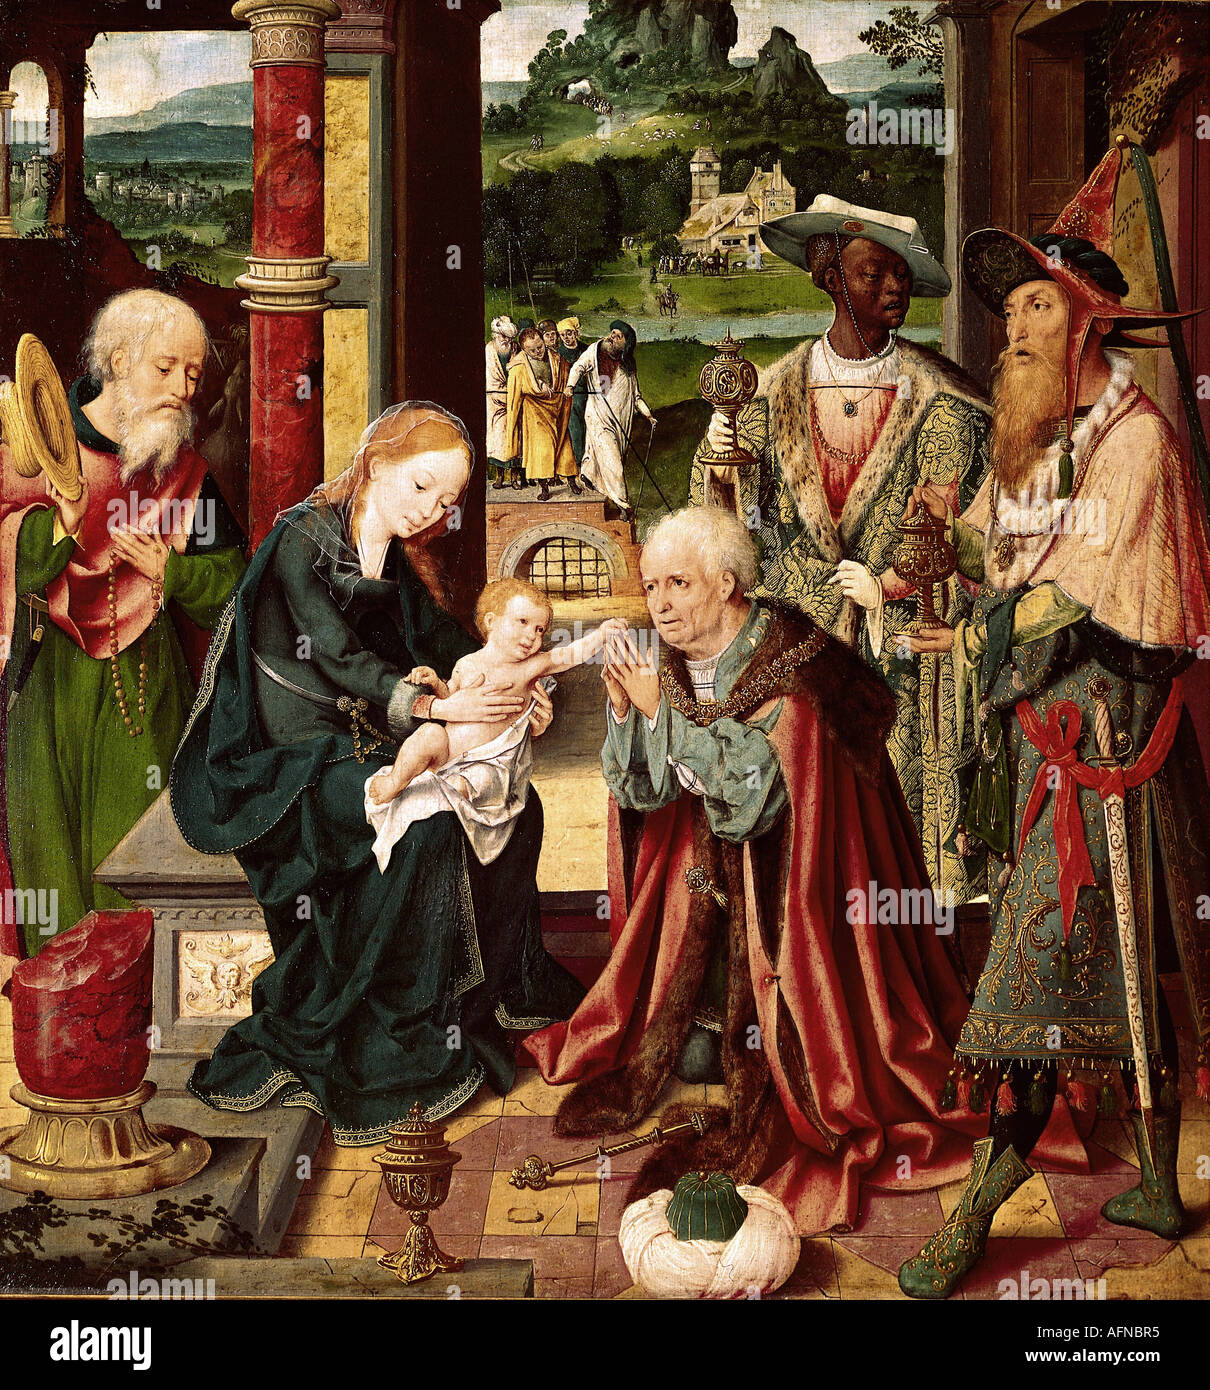 'fine arts, Cleve, Joos van, (1485 - 1540), painting, 'Adoration of the Magi', winged altar, central panel, oak panel, Nationa Stock Photo